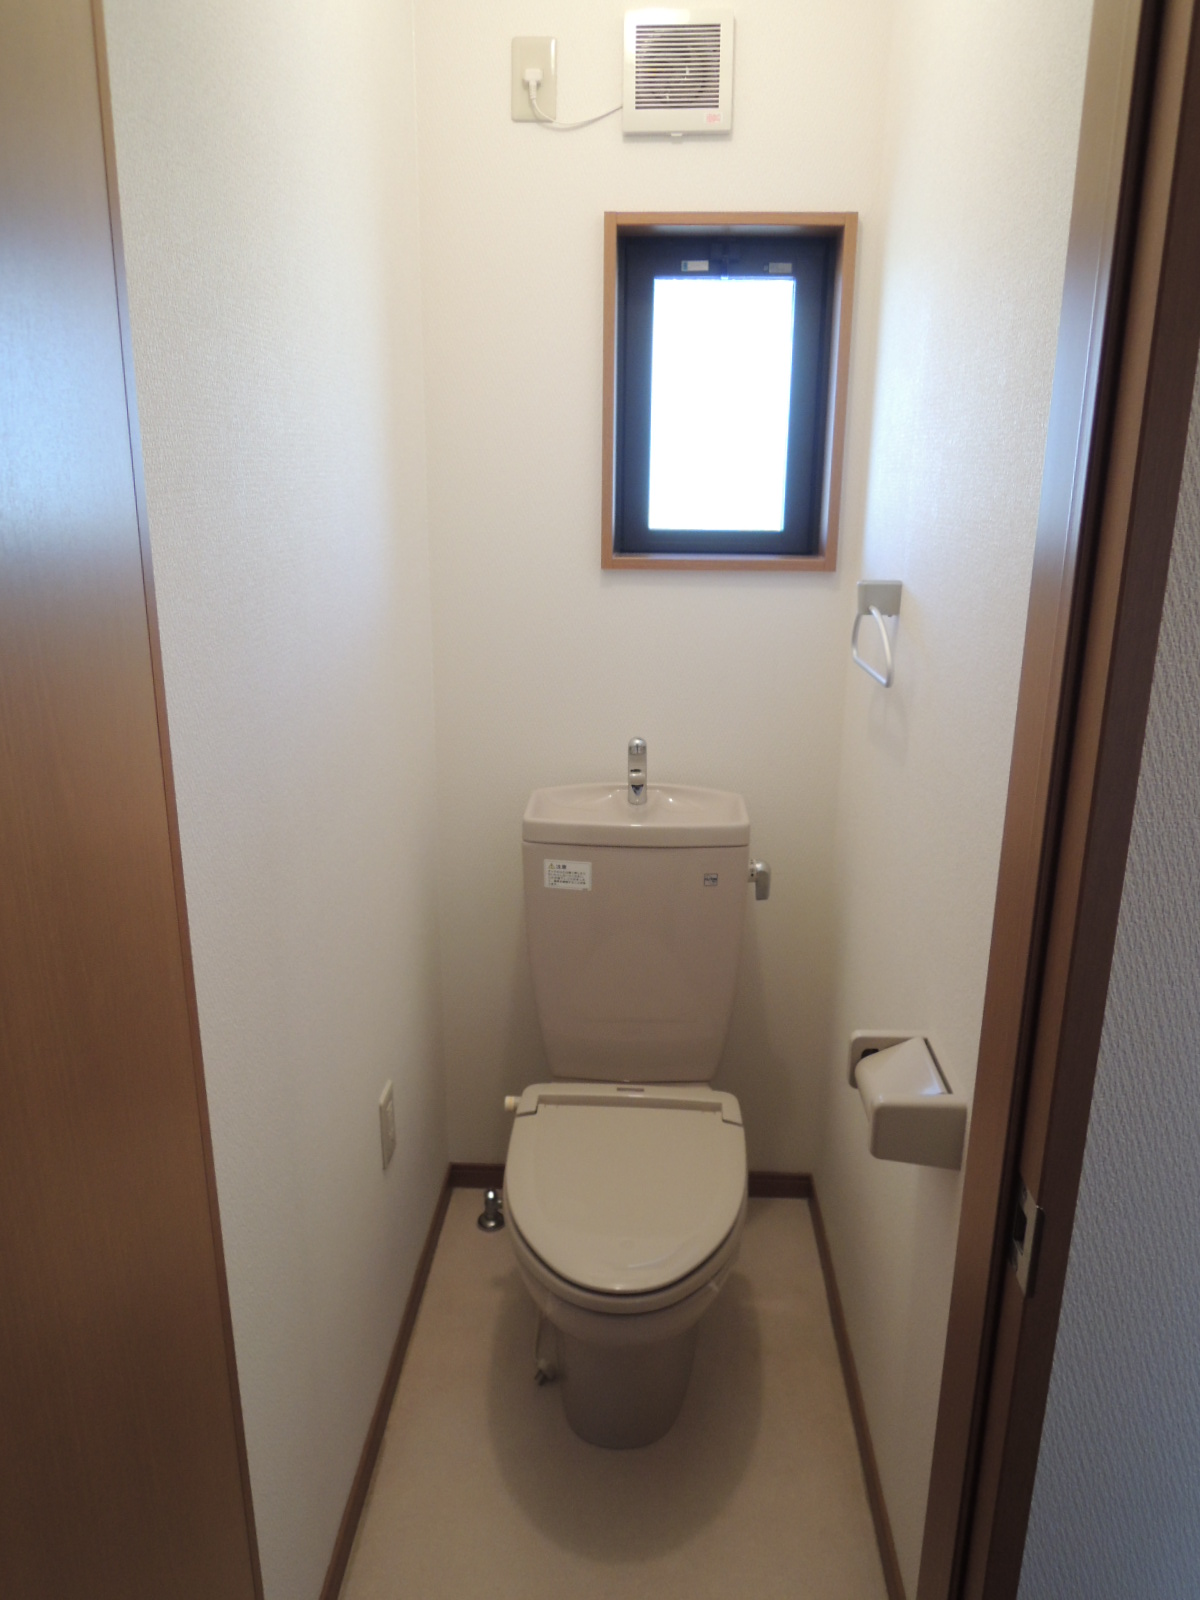 Toilet. It comes with a heating toilet seat.